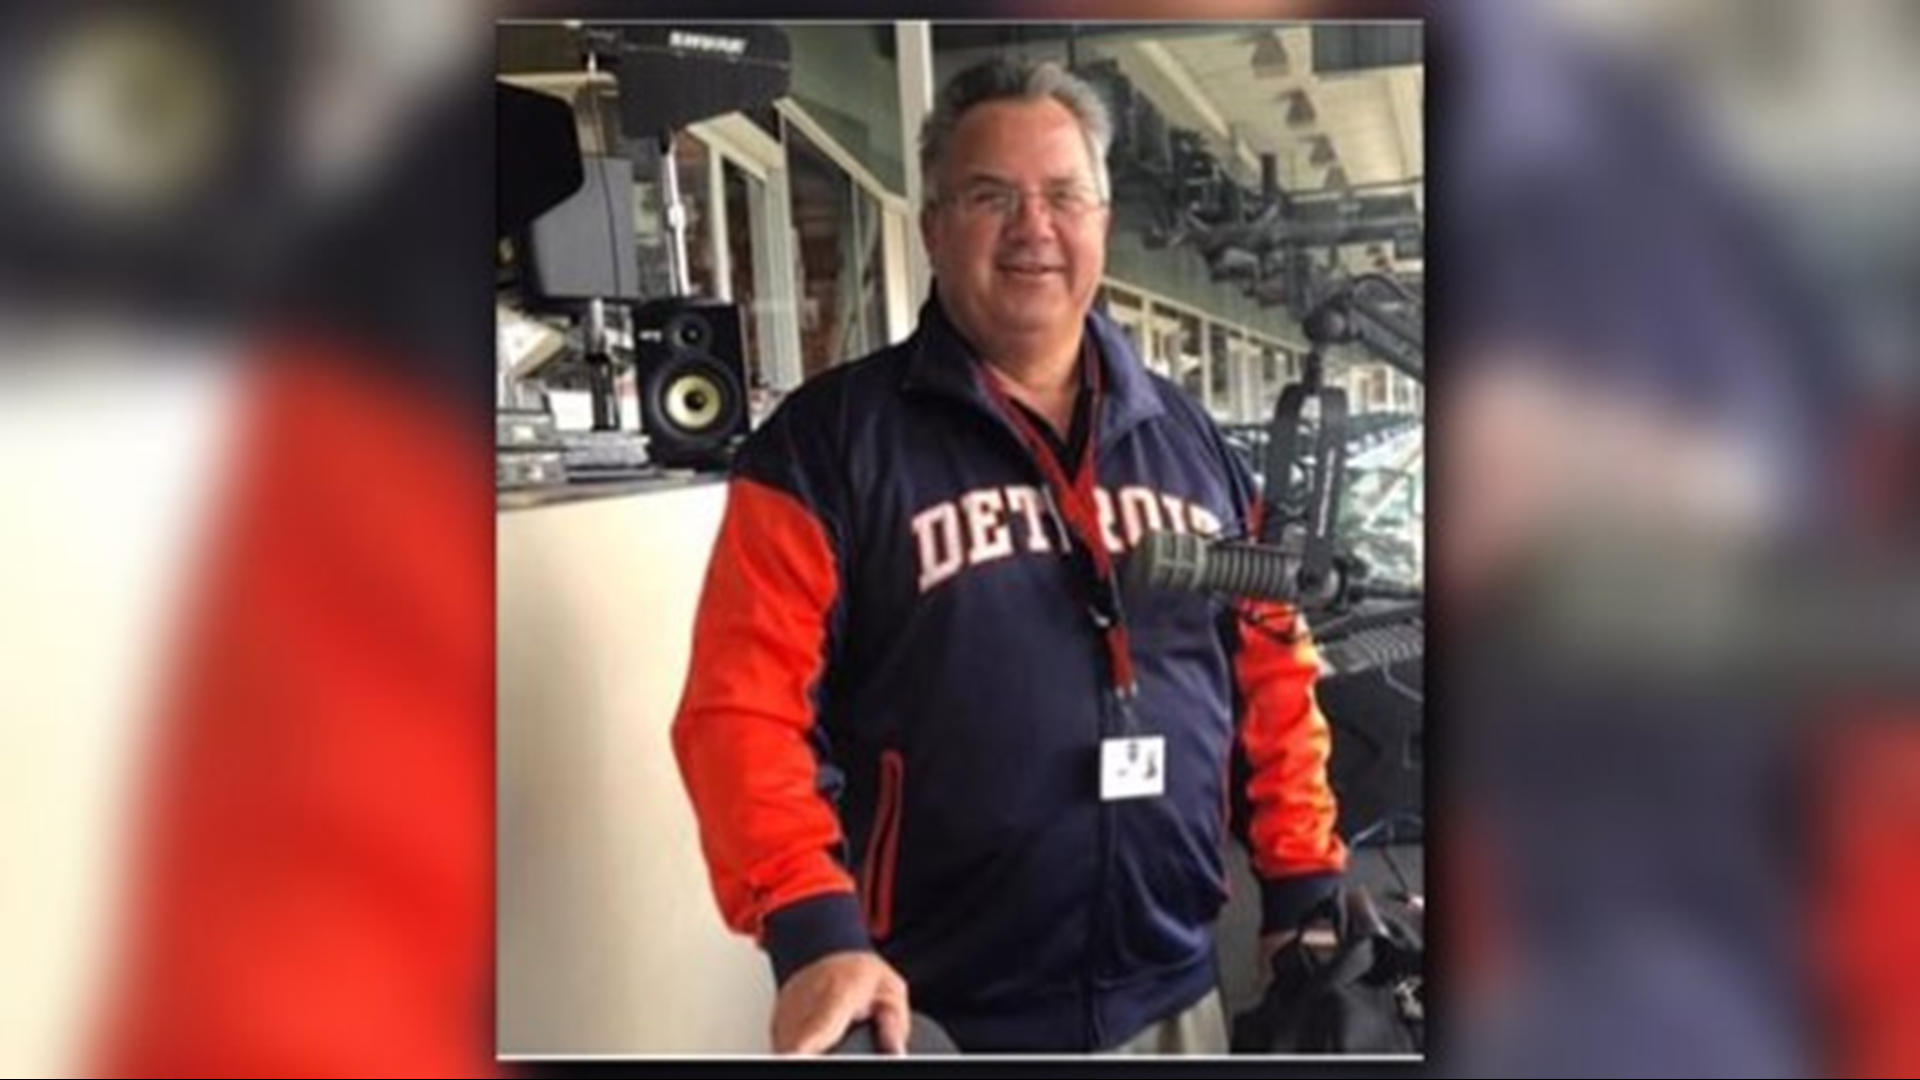 Detroit Tigers public address announcer Jay Allen died Friday morning after battling stage 4 cancer, his family announced.